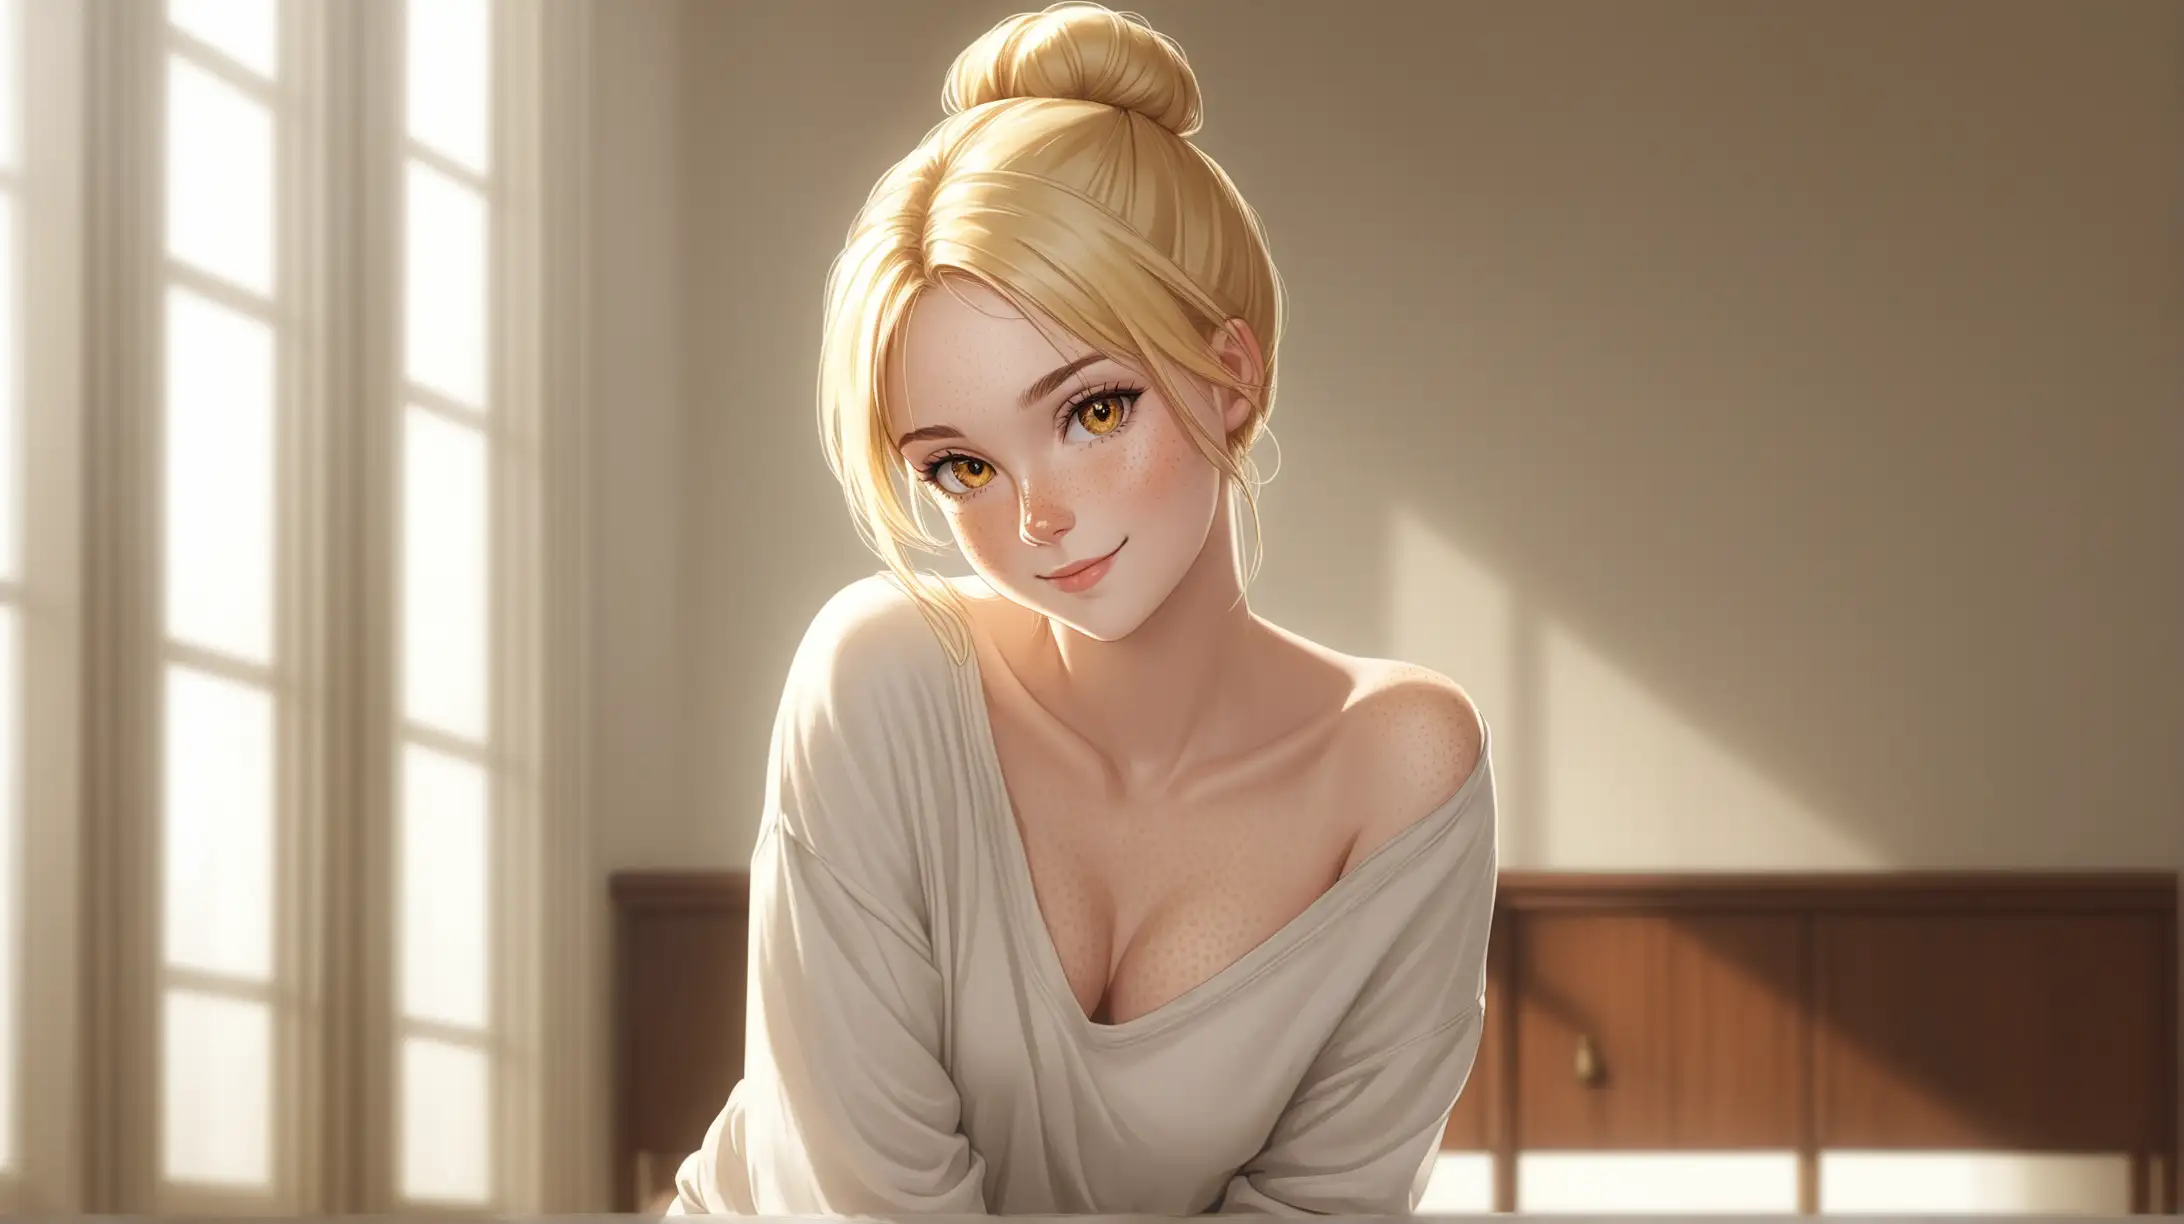 Draw a young woman, long blonde hair in a bun, gold eyes, freckles, perky figure,
relaxed outfit, high quality, long shot, indoors, seductive pose, natural lighting, smiling at the viewer